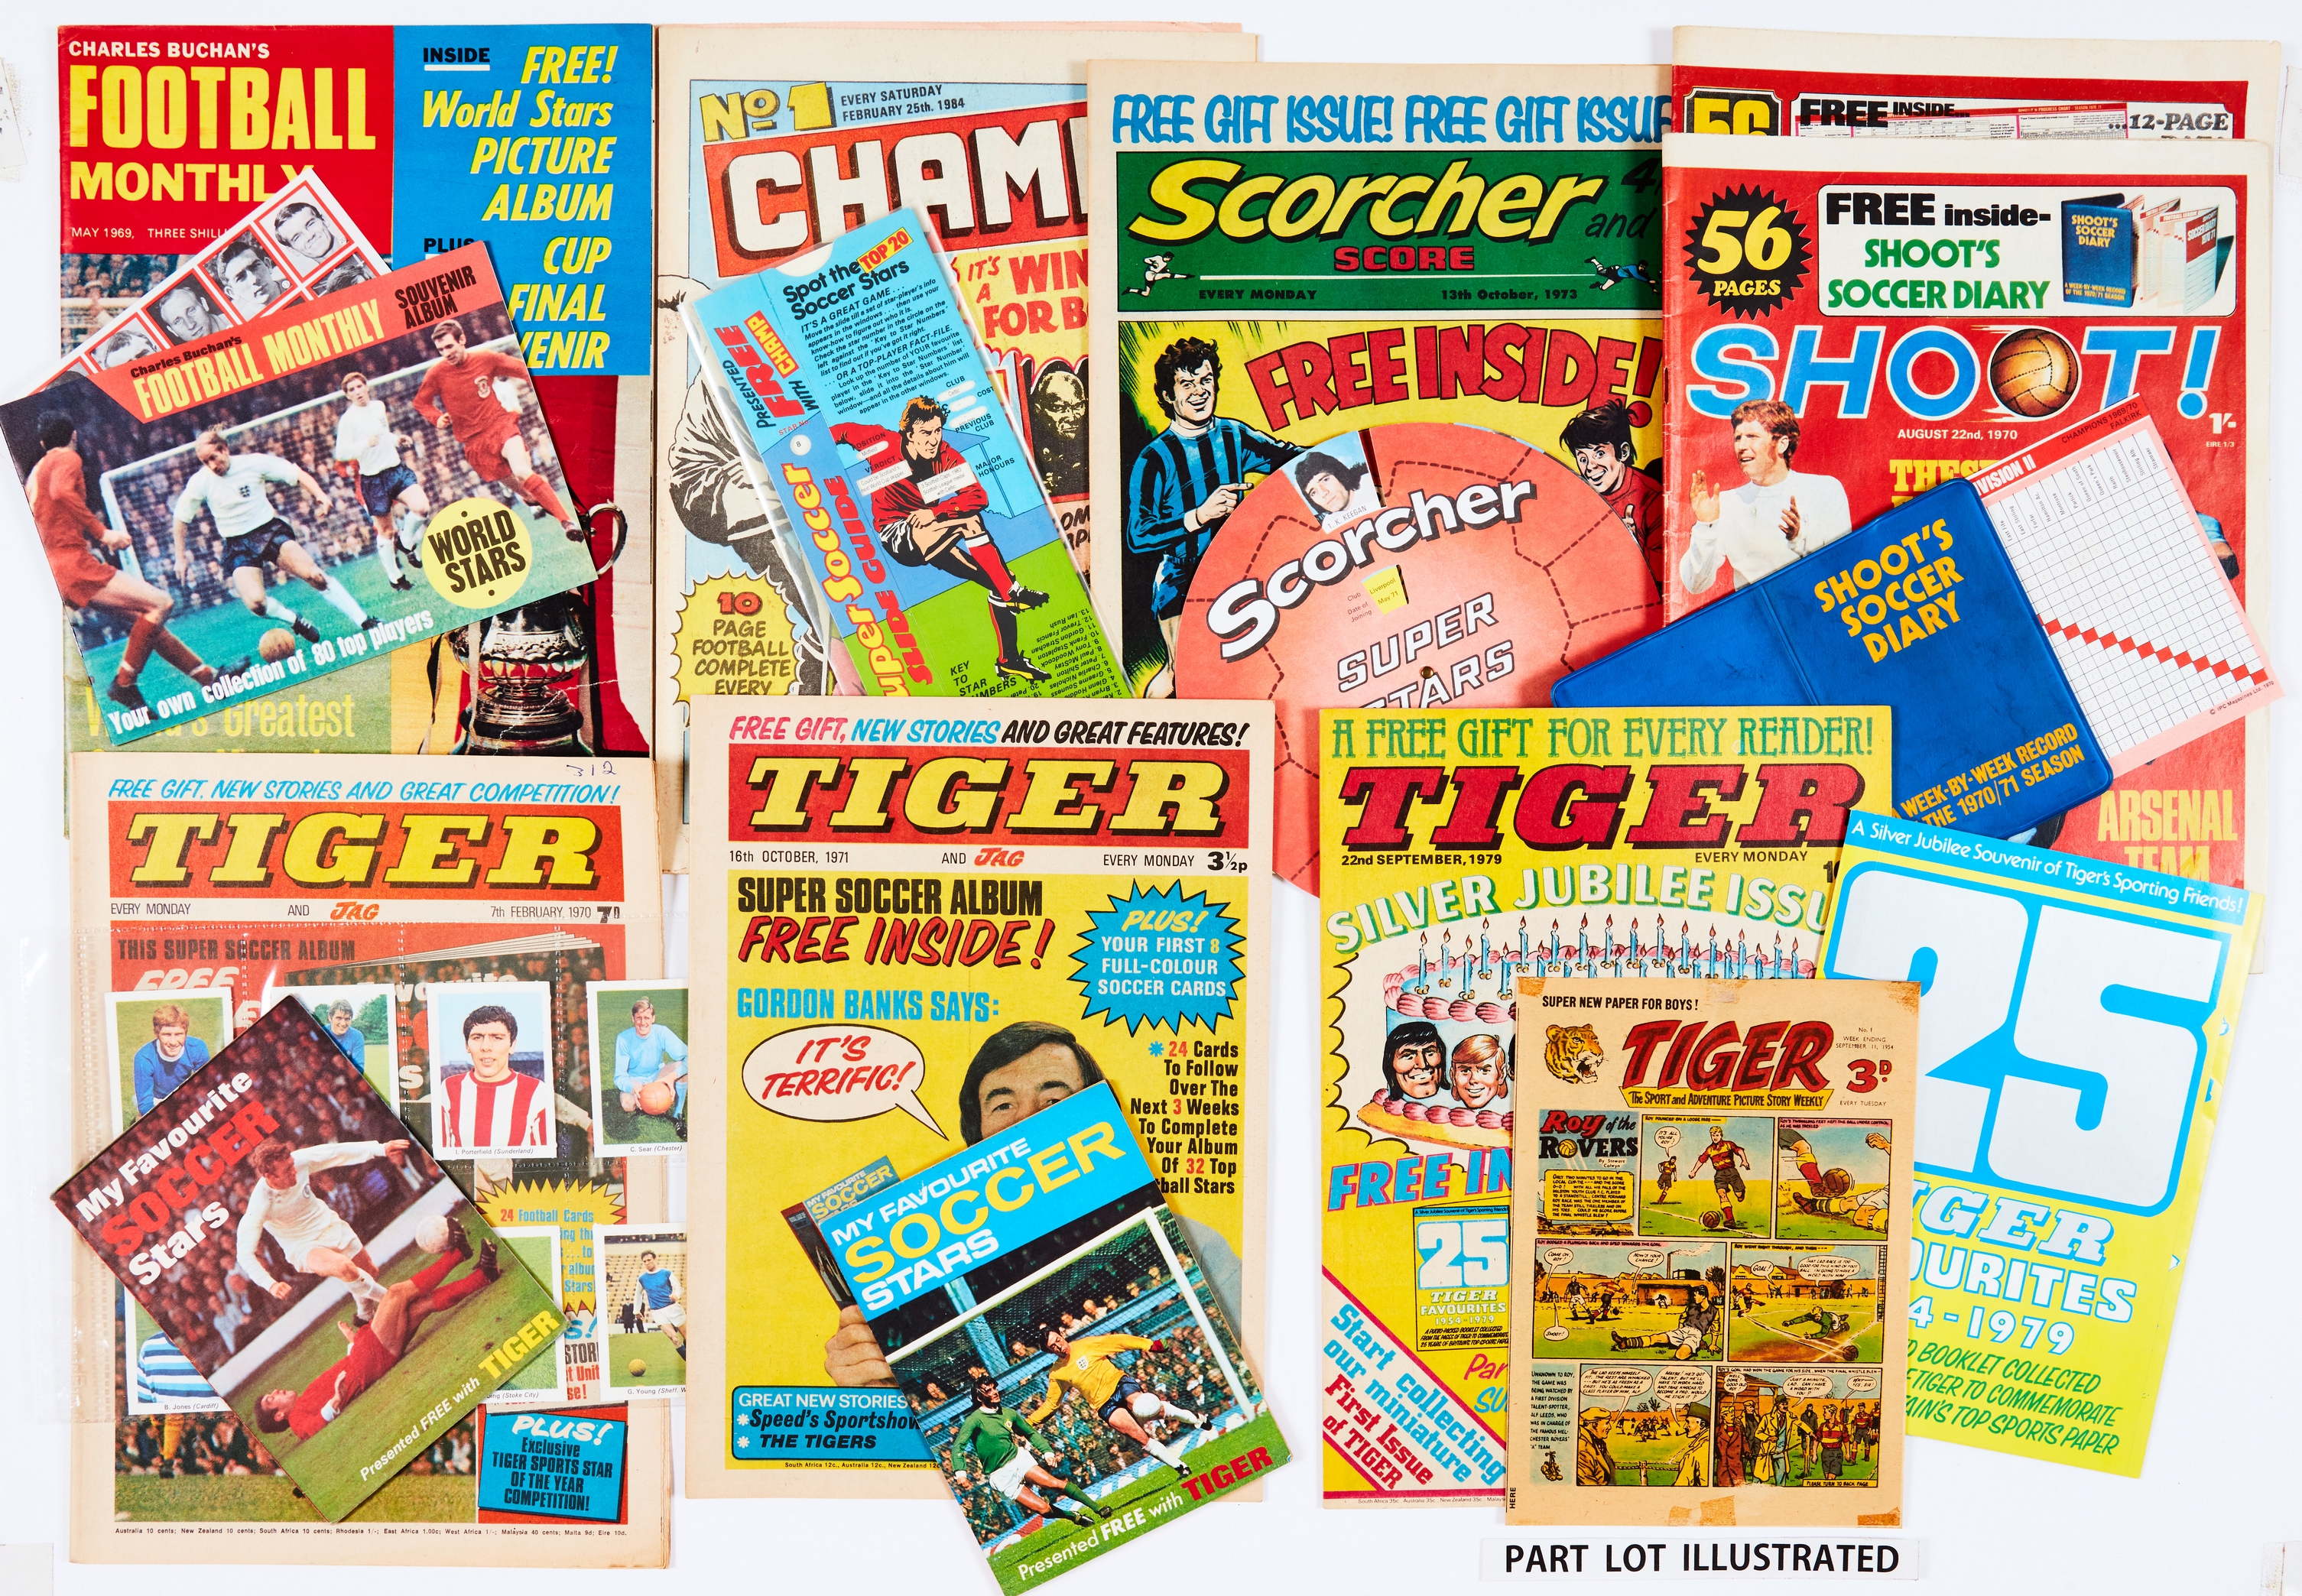 Football Free Gifts in Comics (1969-84). Charles Buchan's Football Monthly (May 1969) wfg with